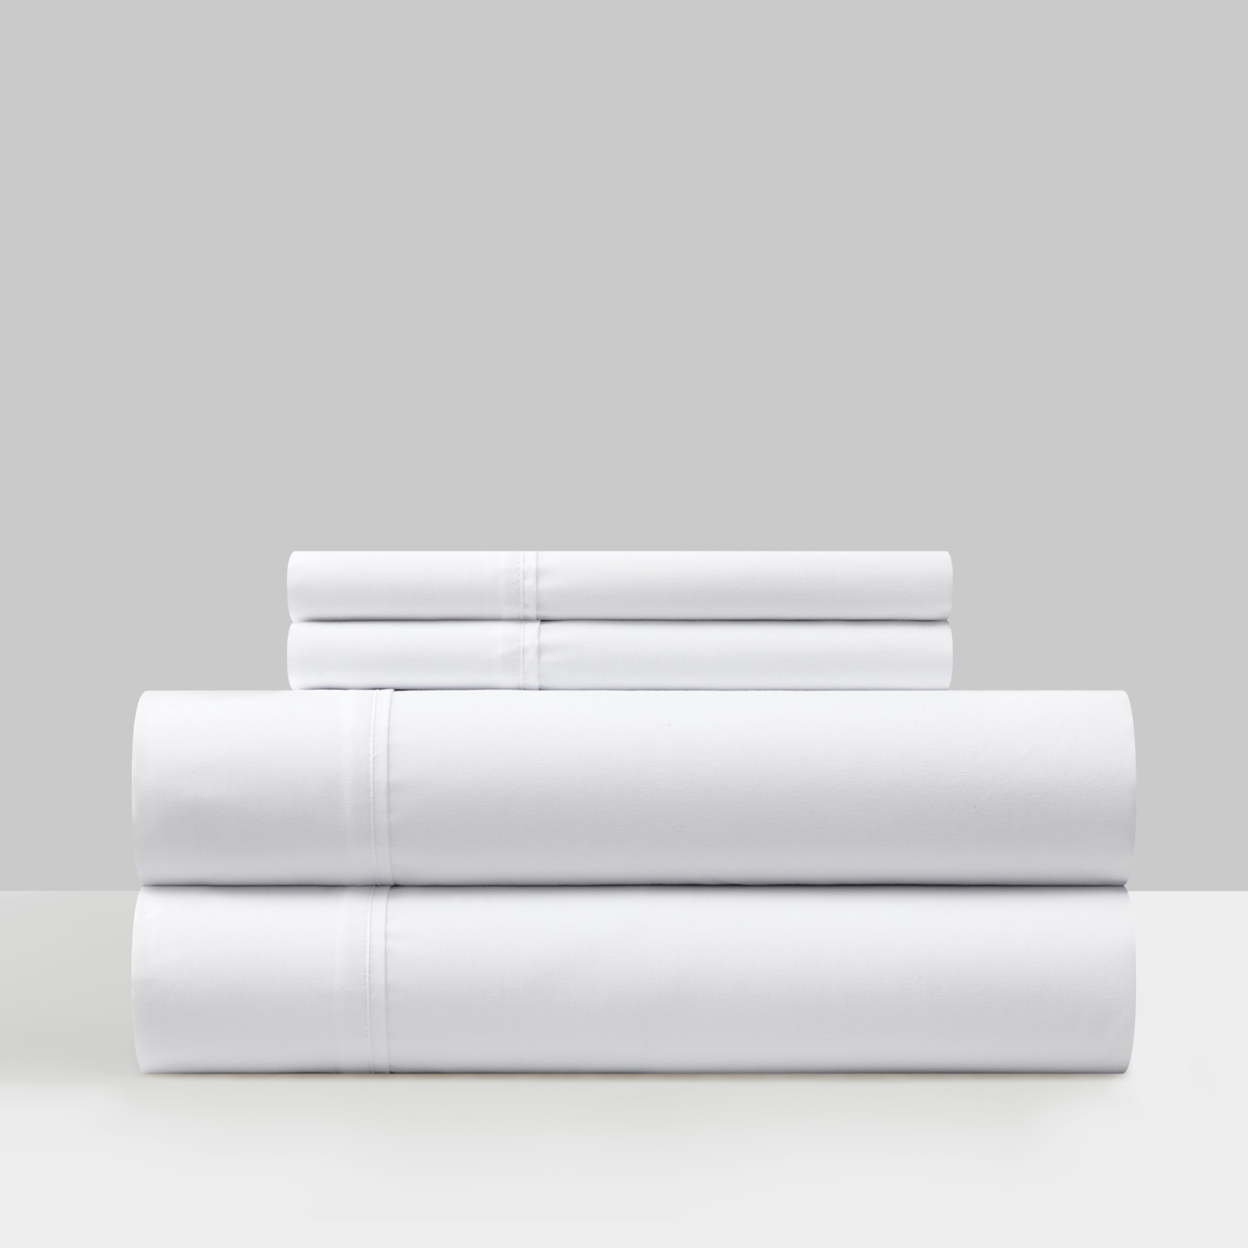 Shton 3 Or 4 Piece Sheet Set Super Soft Solid Color With Piping Flange Edge - White, Queen